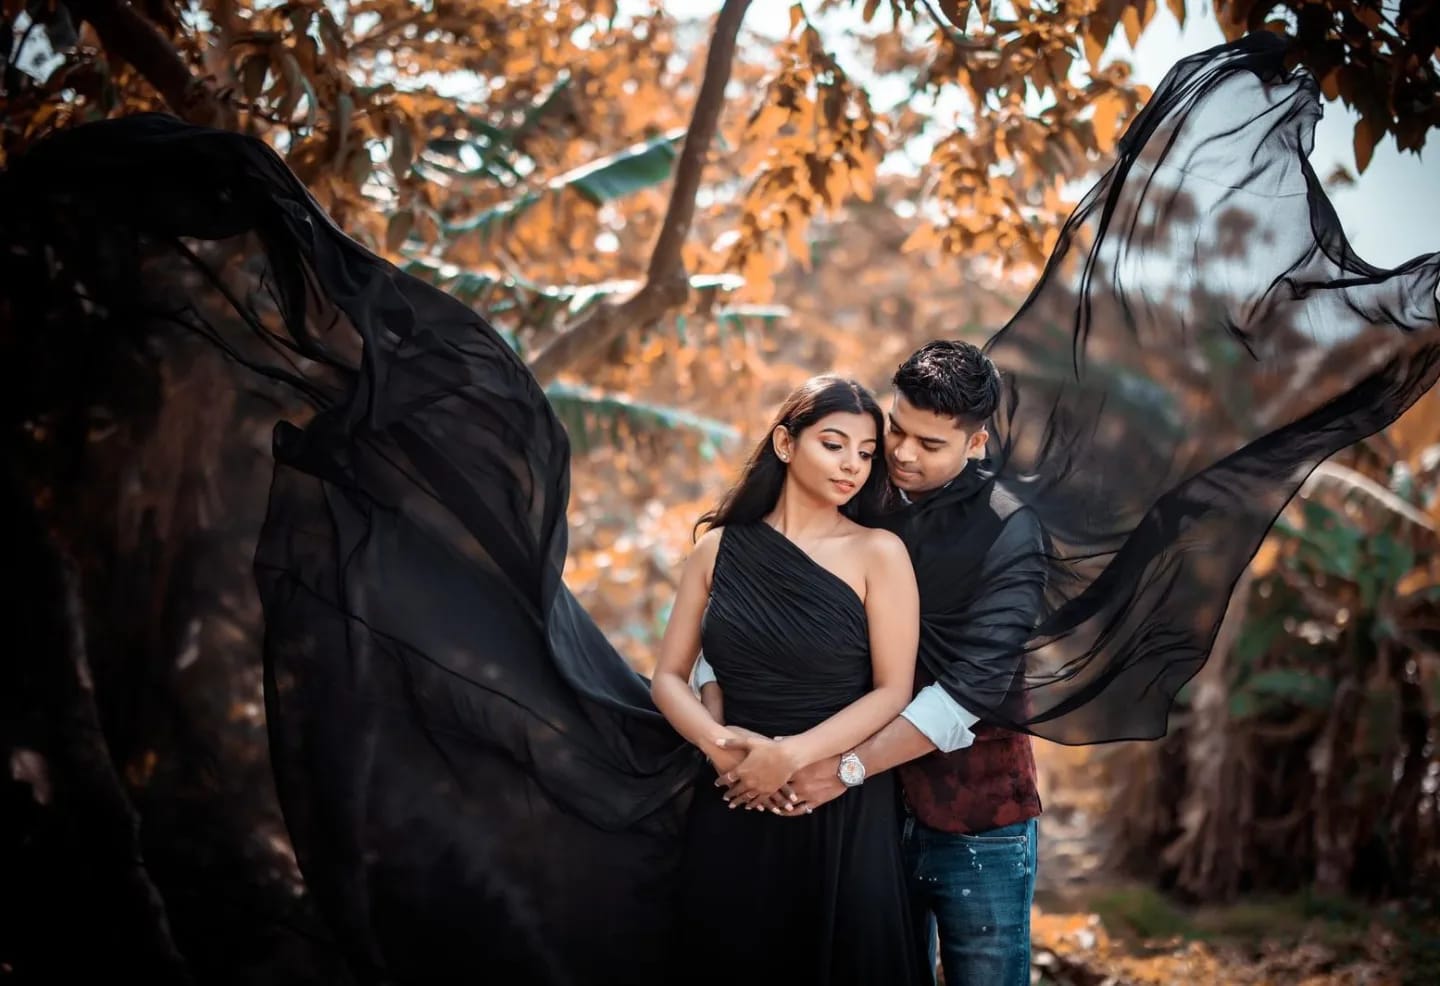 Pre-wedding gown | Pre wedding photoshoot outfit, Maternity dresses  photography, Pre wedding photoshoot